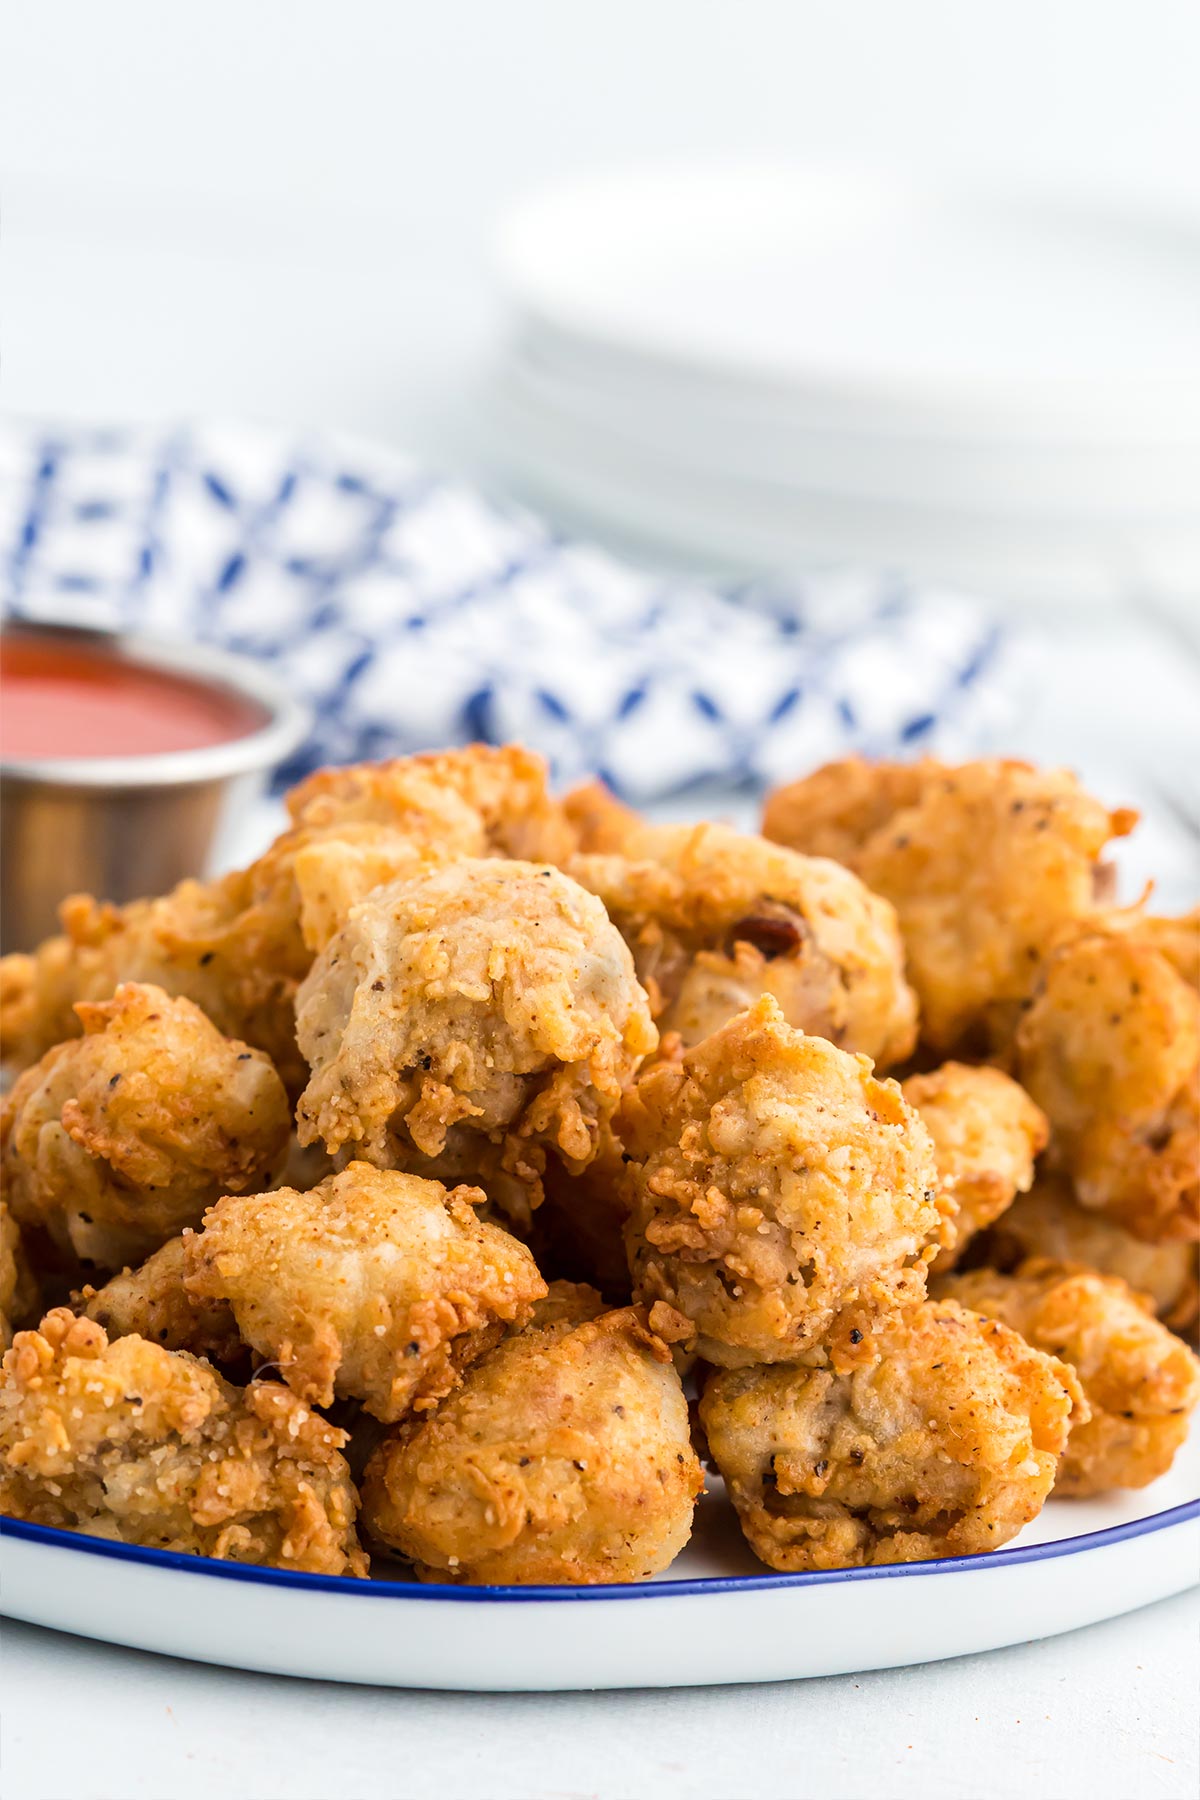 Southern Fried Chicken Gizzards: Delicious Recipes, Health Benefits & Serving Ideas